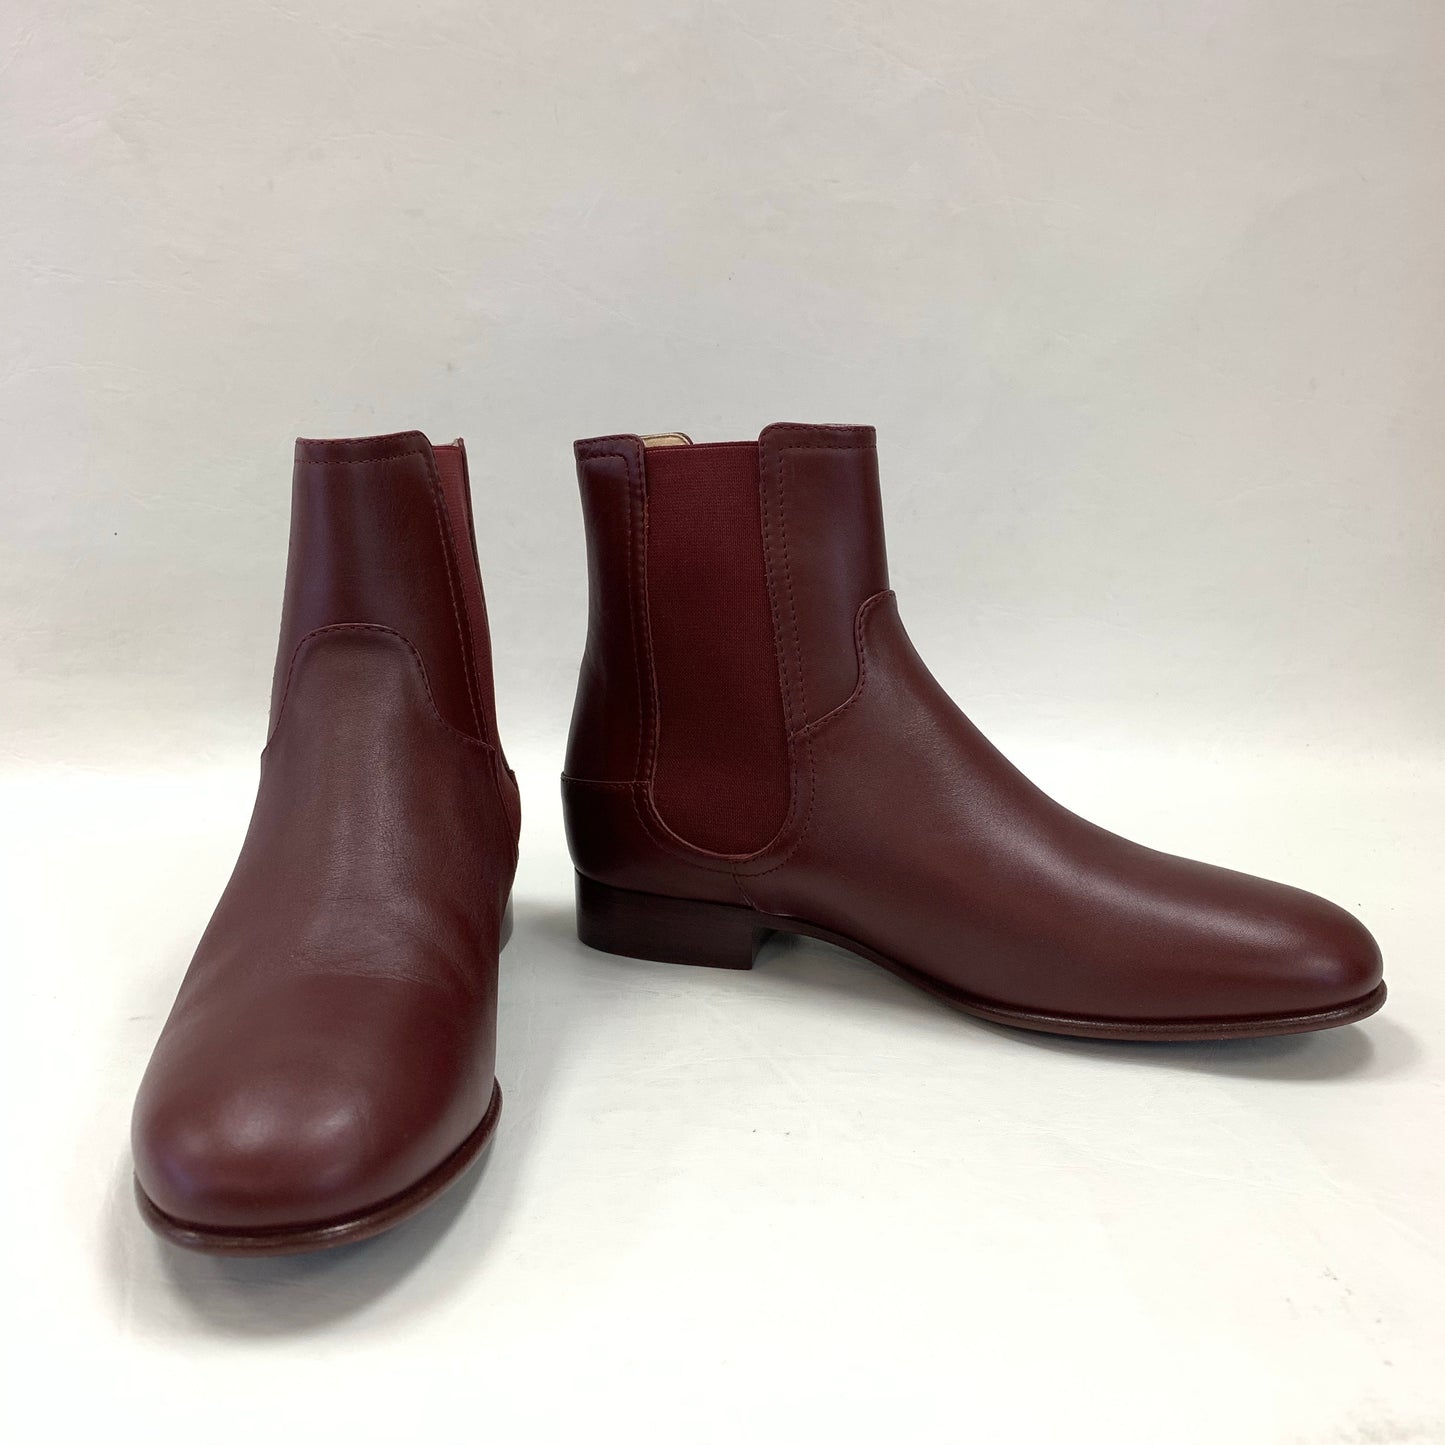 Authentic Chanel 16A Burgundy Leather Booties